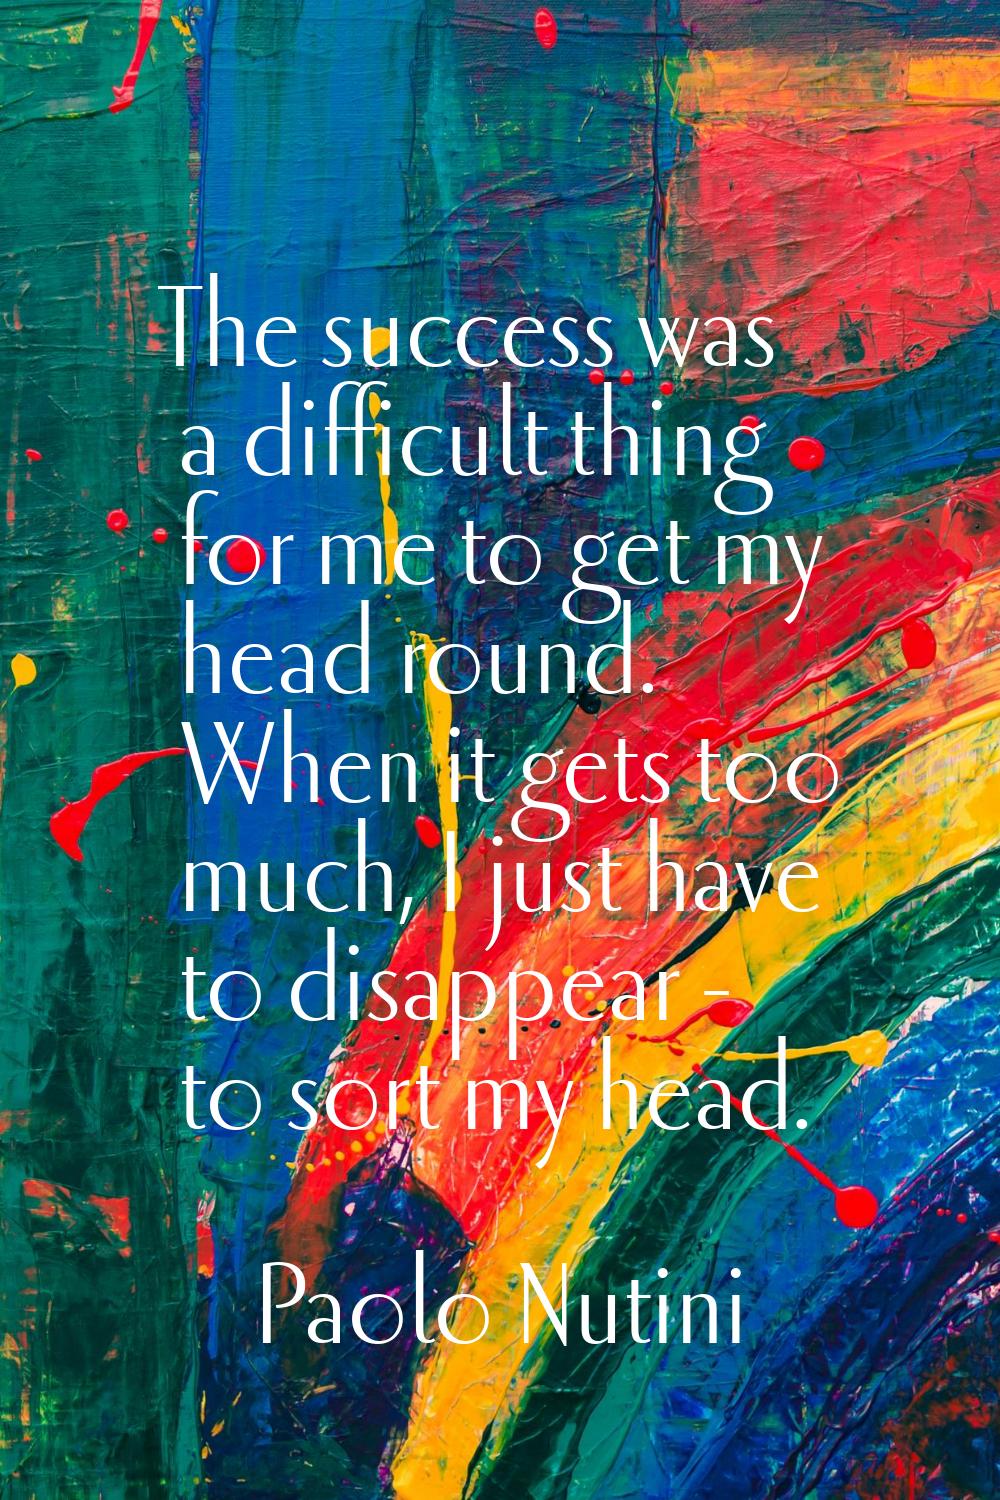 The success was a difficult thing for me to get my head round. When it gets too much, I just have t